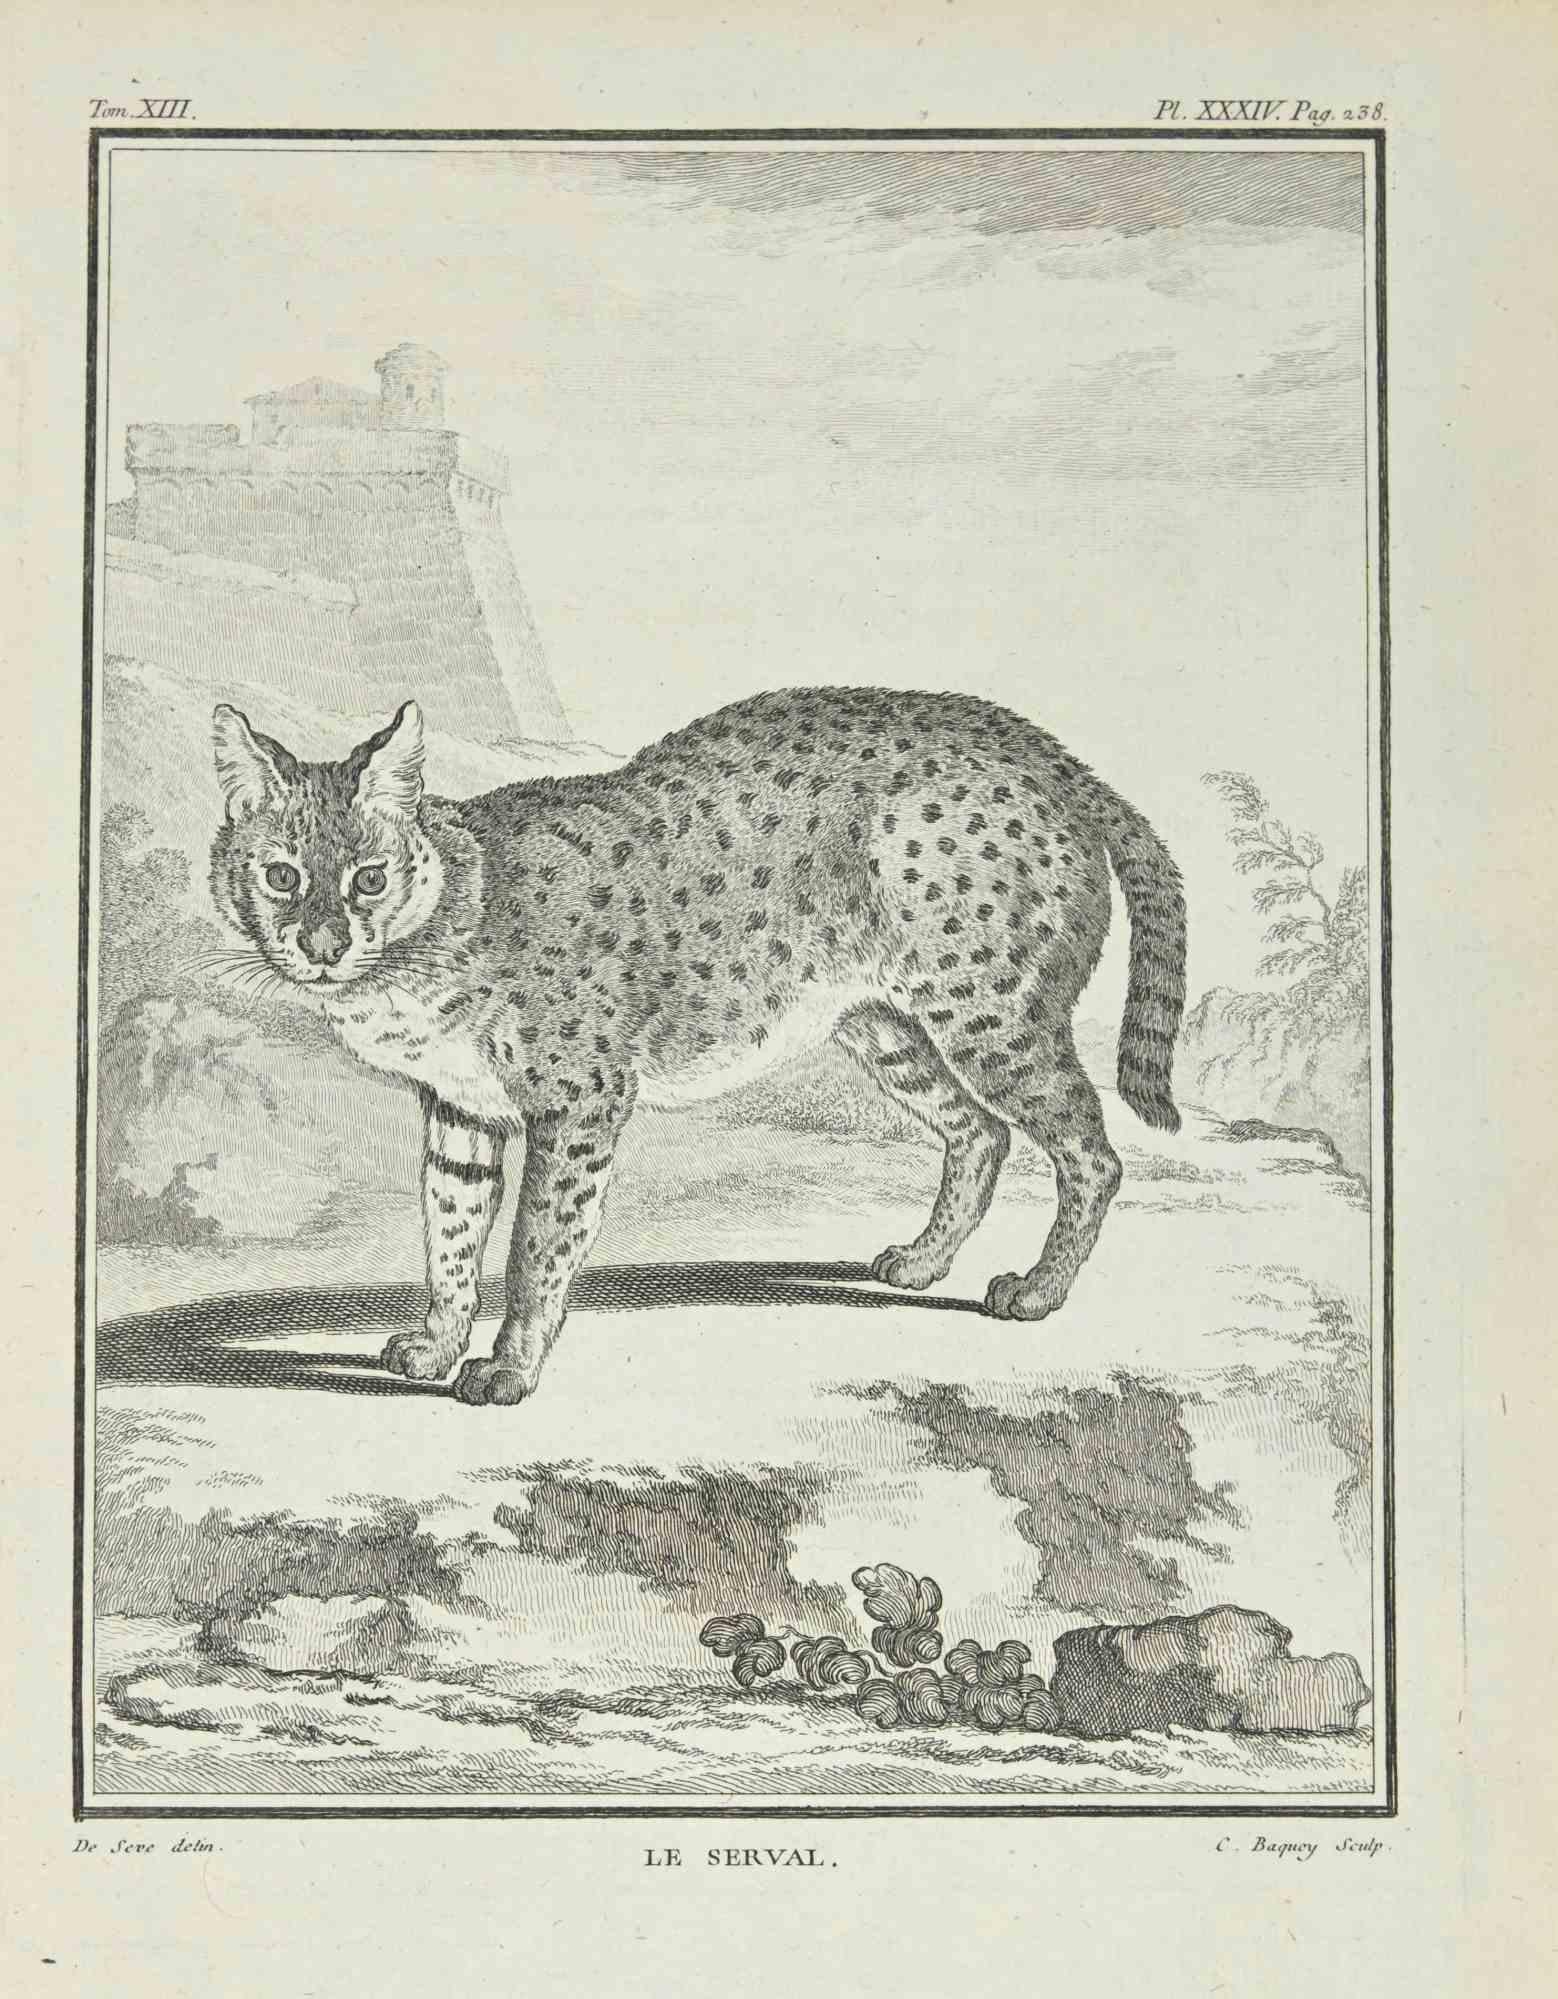 Le Serval - Etching by Jean Charles Baquoy - 1771